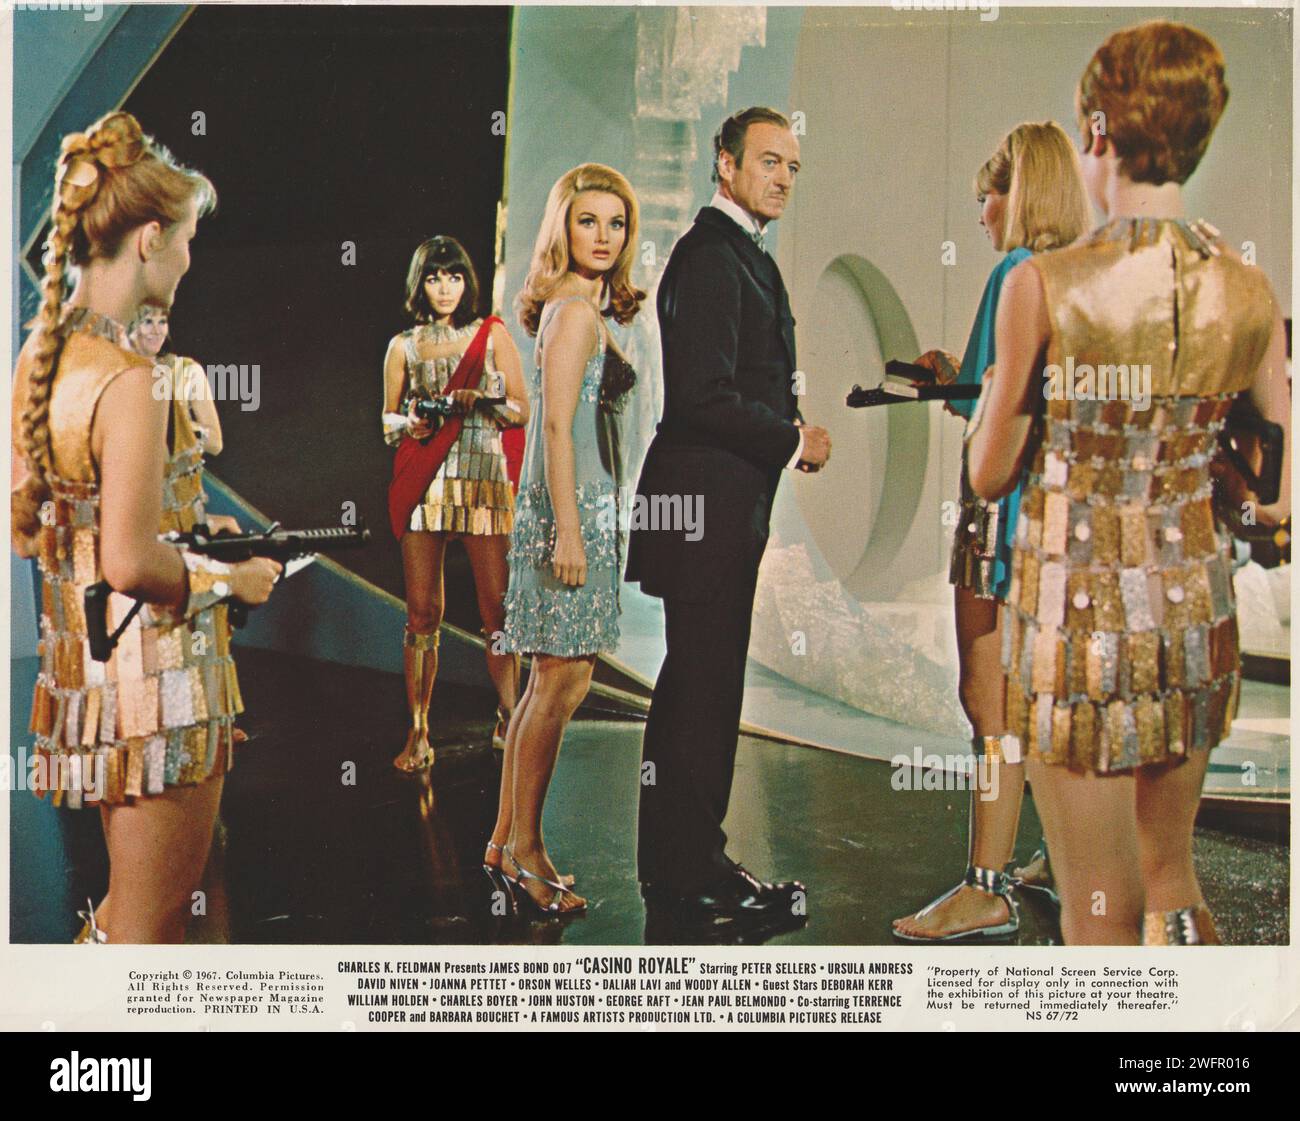 Casino Royale David Niven agent James Bond in the wild psychedelic spoof. Starring Peter Sellers, Ursula Andress, and Orson Welles Stock Photo